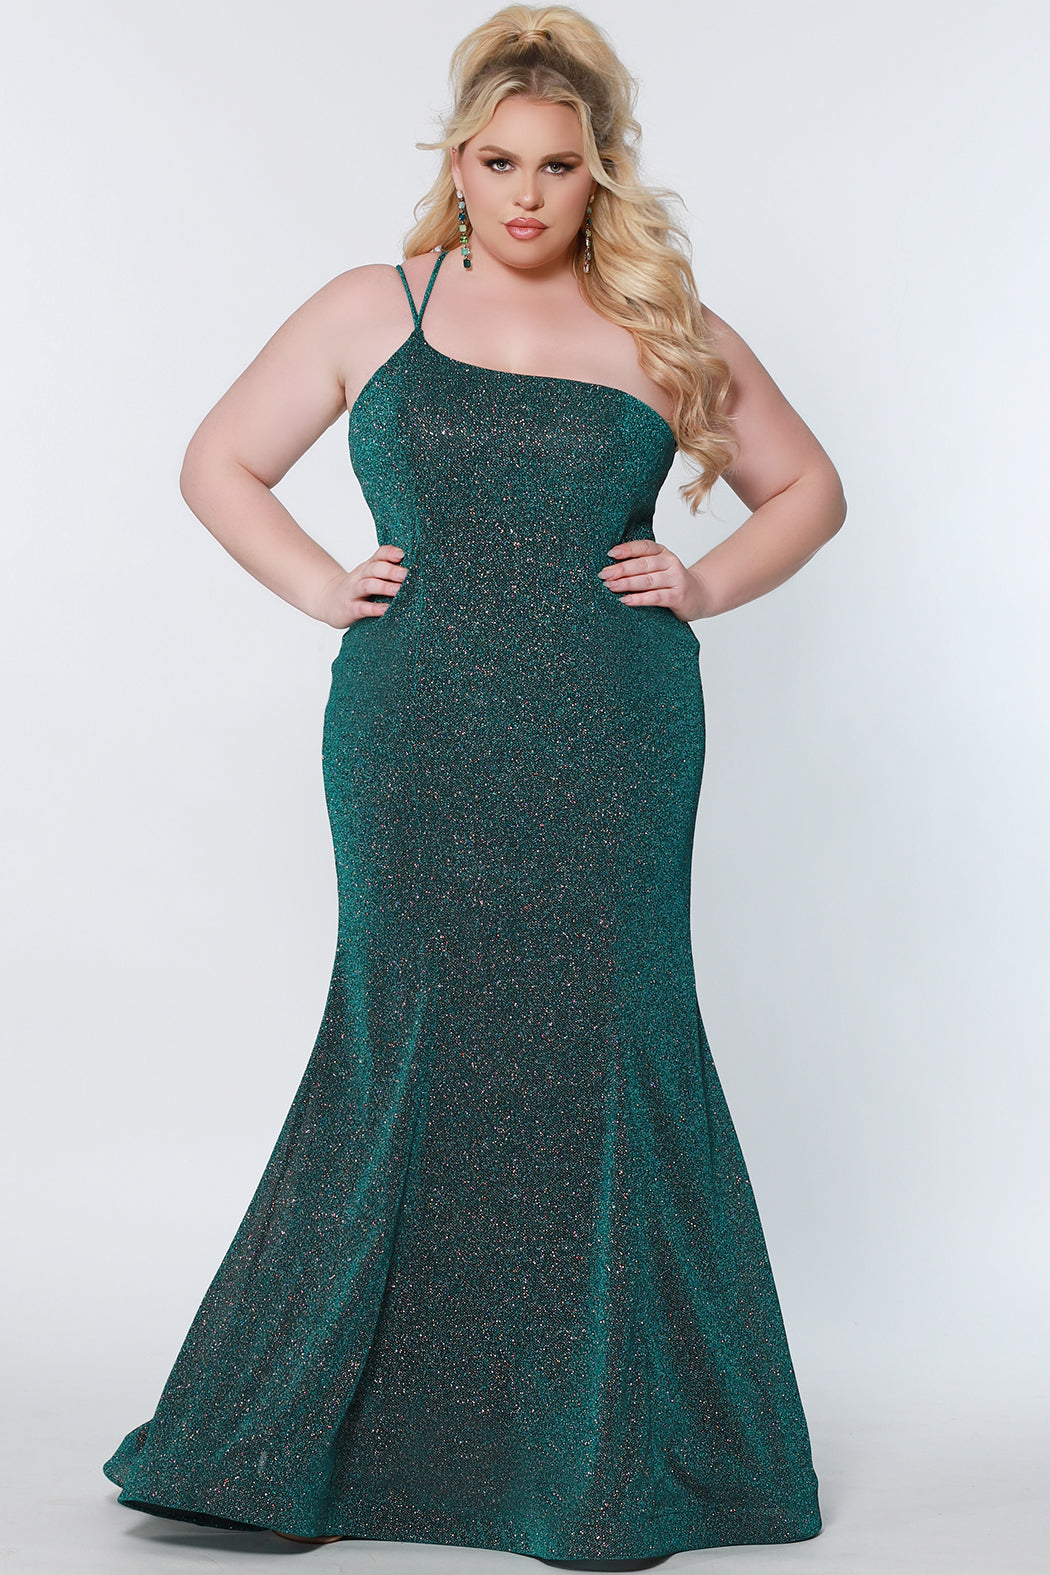 Tease Prom TE2218 Plus size green one shoulder spaghetti strap shimmer fitted dress.